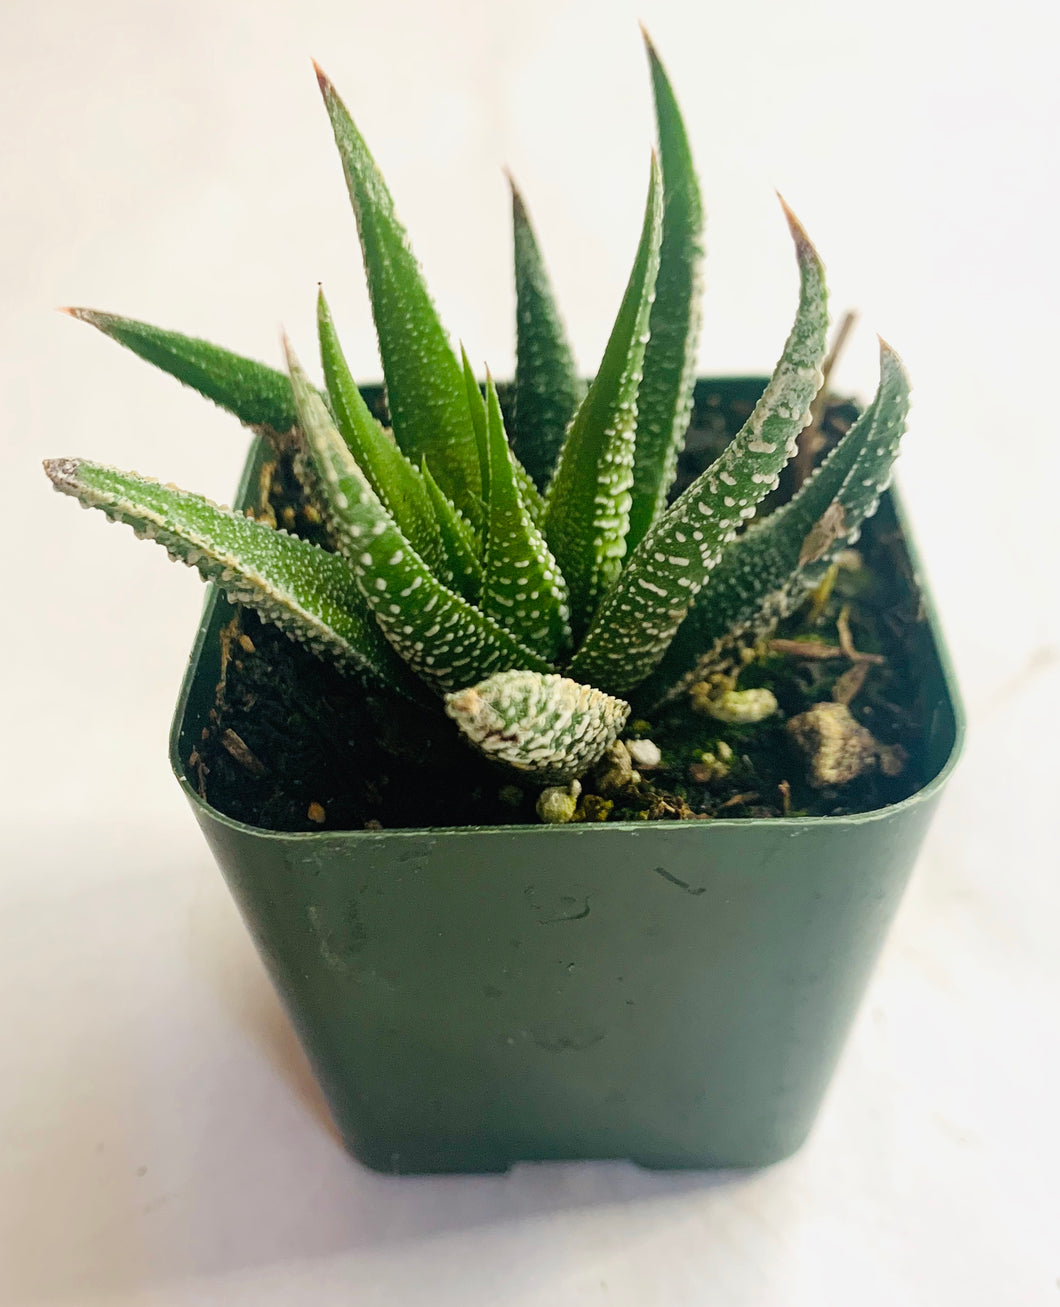 Haworthia selexie: a closeup of a rosette-shaped succulent with long pointed leaves. The leaves are green, with uniform white spots.